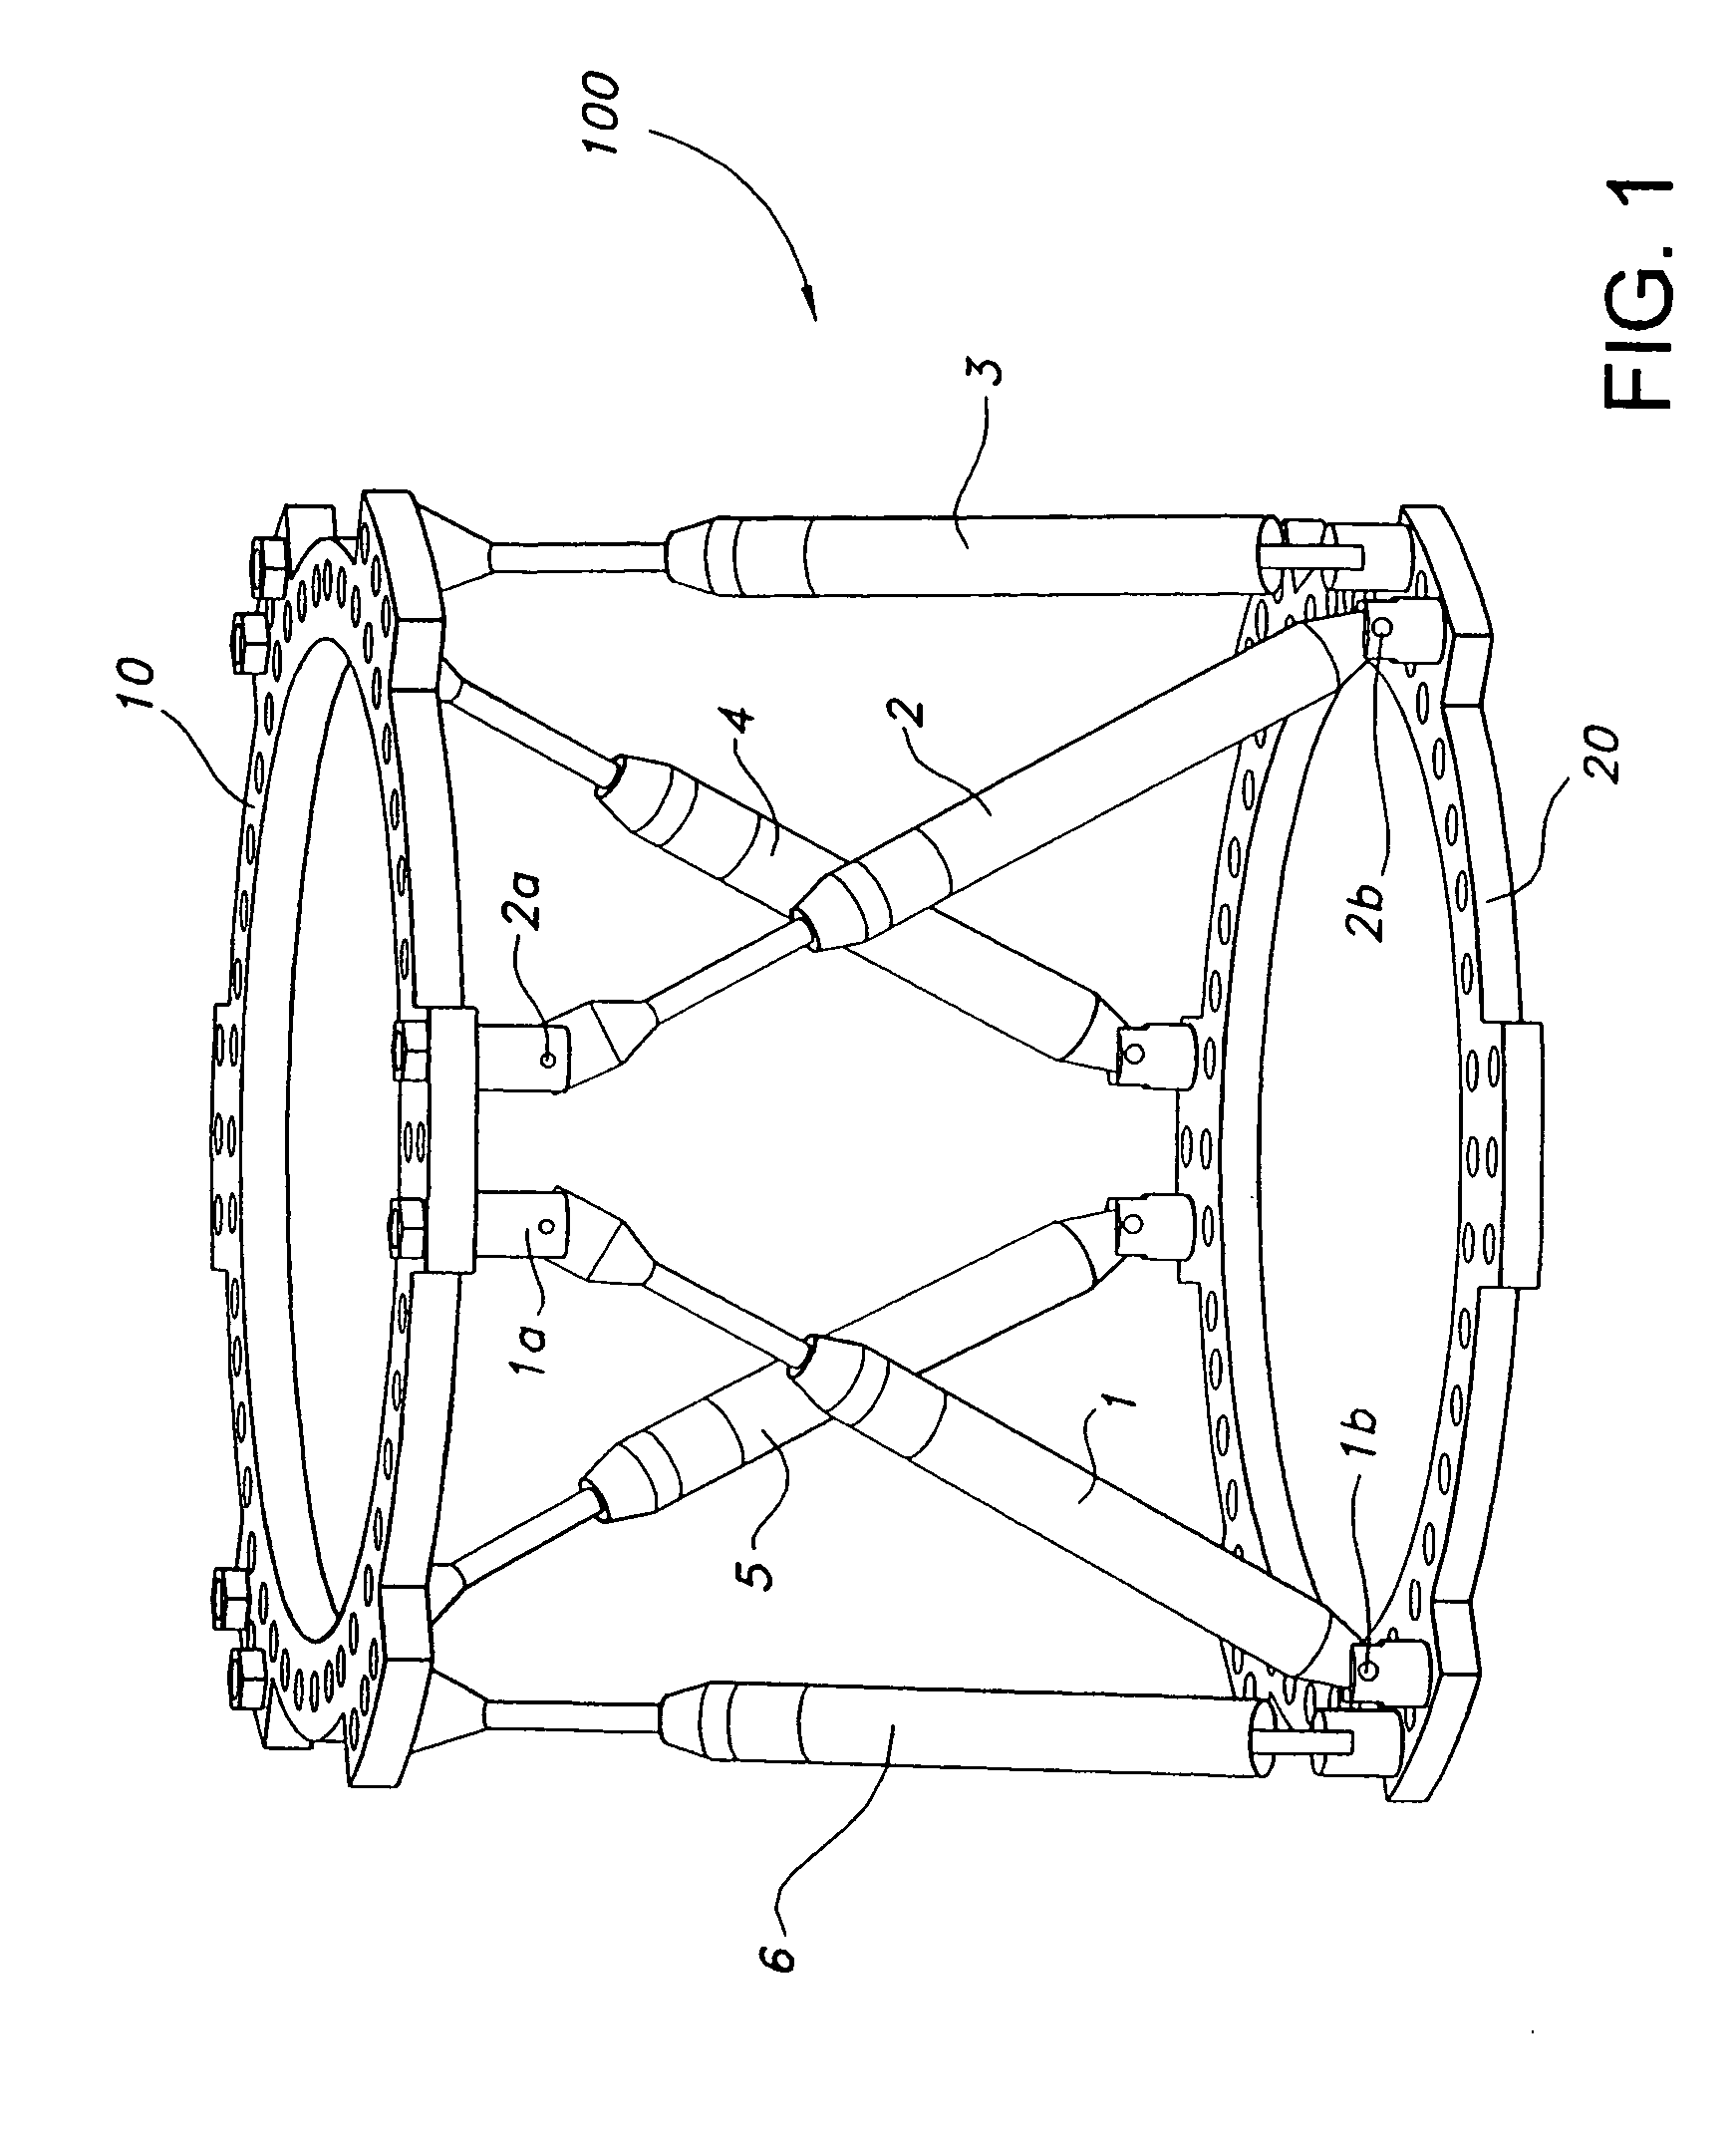 Orthopaedic fixation method and device with delivery and presentation features